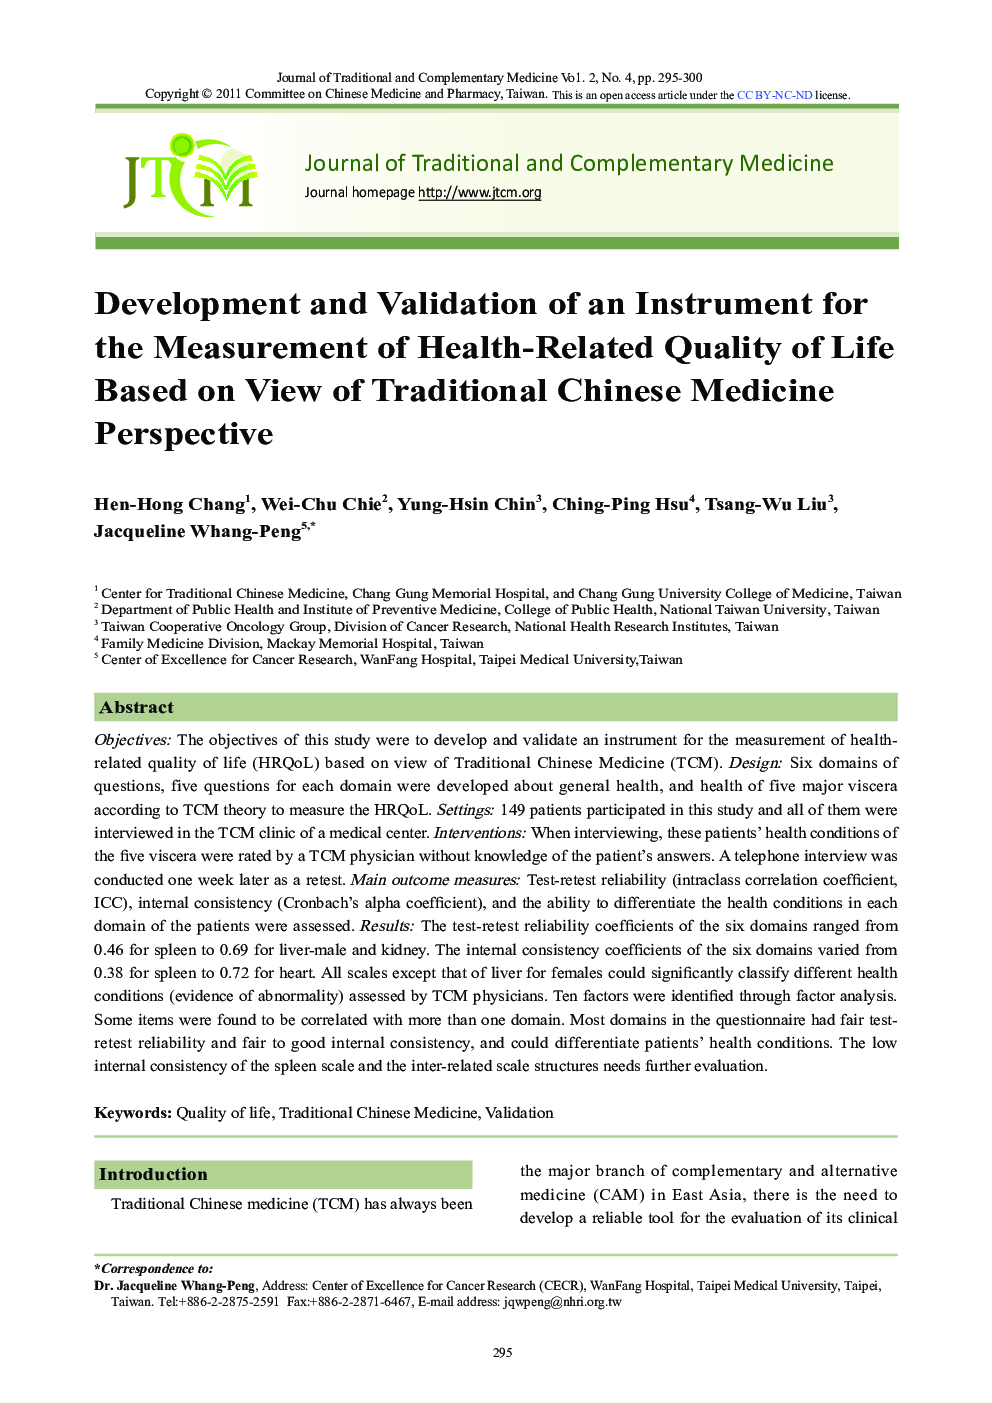 Development and Validation of an Instrument for the Measurement of Health-Related Quality of Life Based on View of Traditional Chinese Medicine Perspective